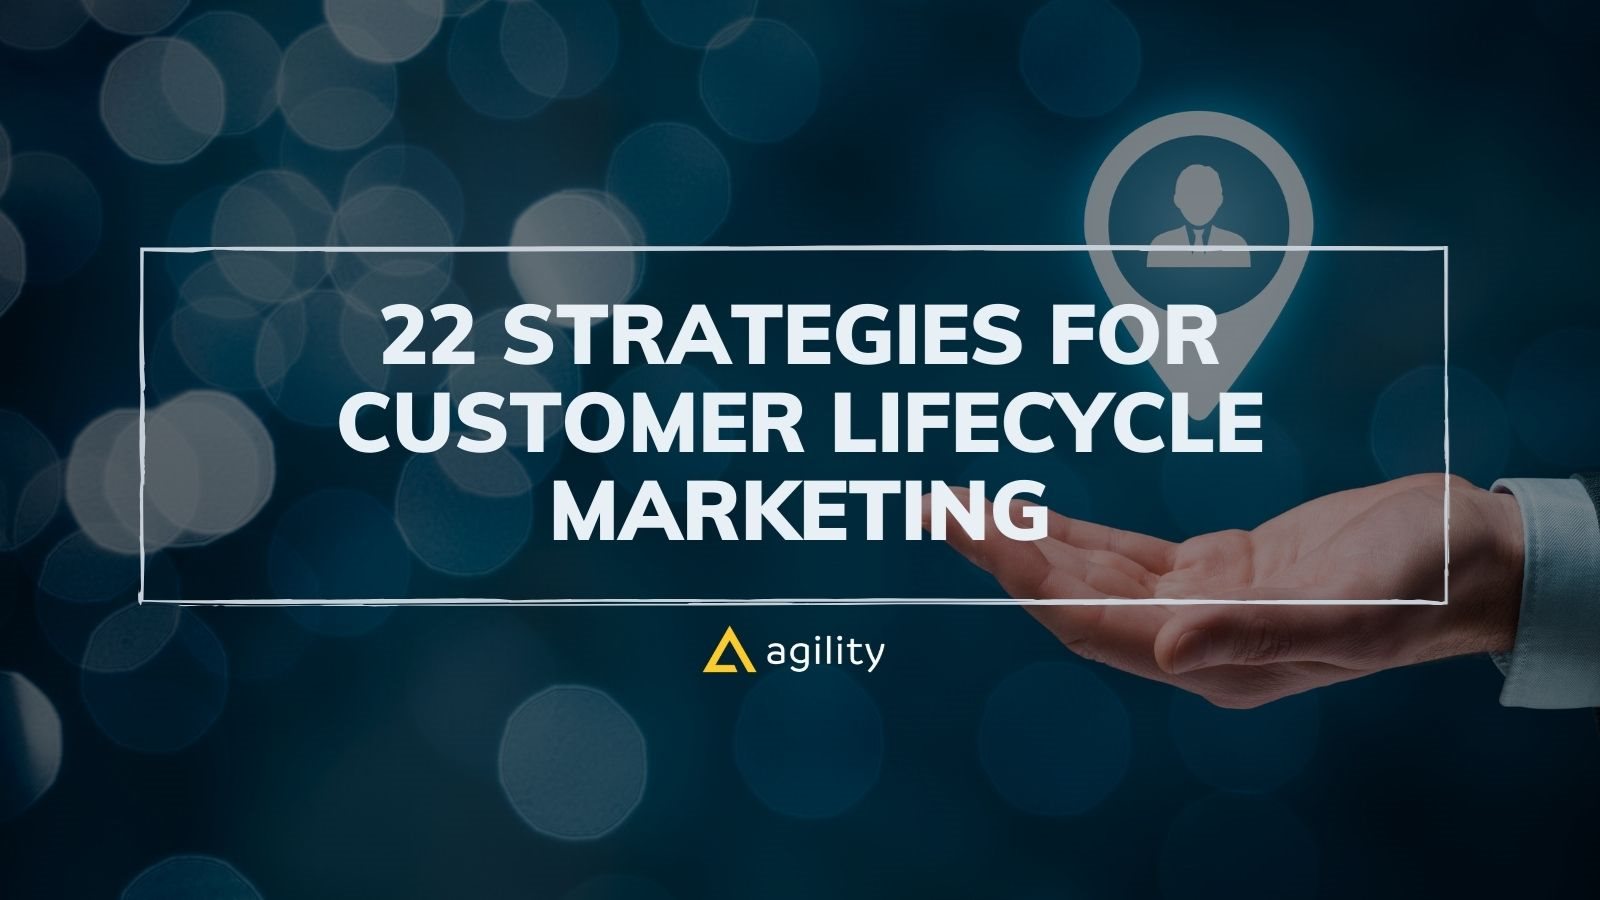 22 Strategies for Customer Lifecycle Marketing